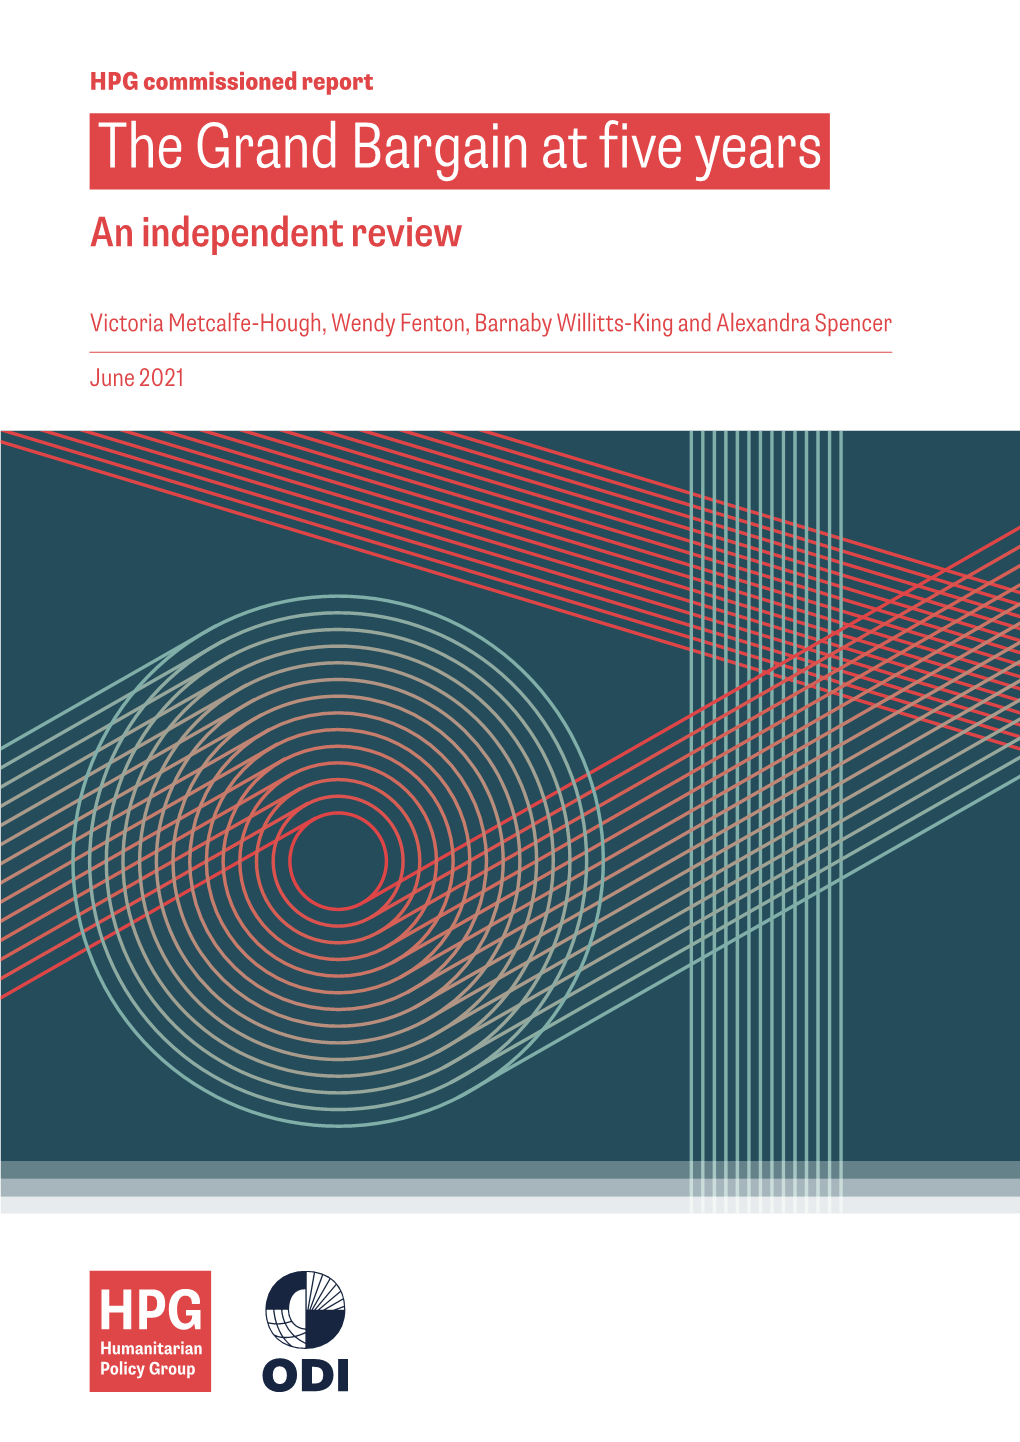 The Grand Bargain at Five Years an Independent Review